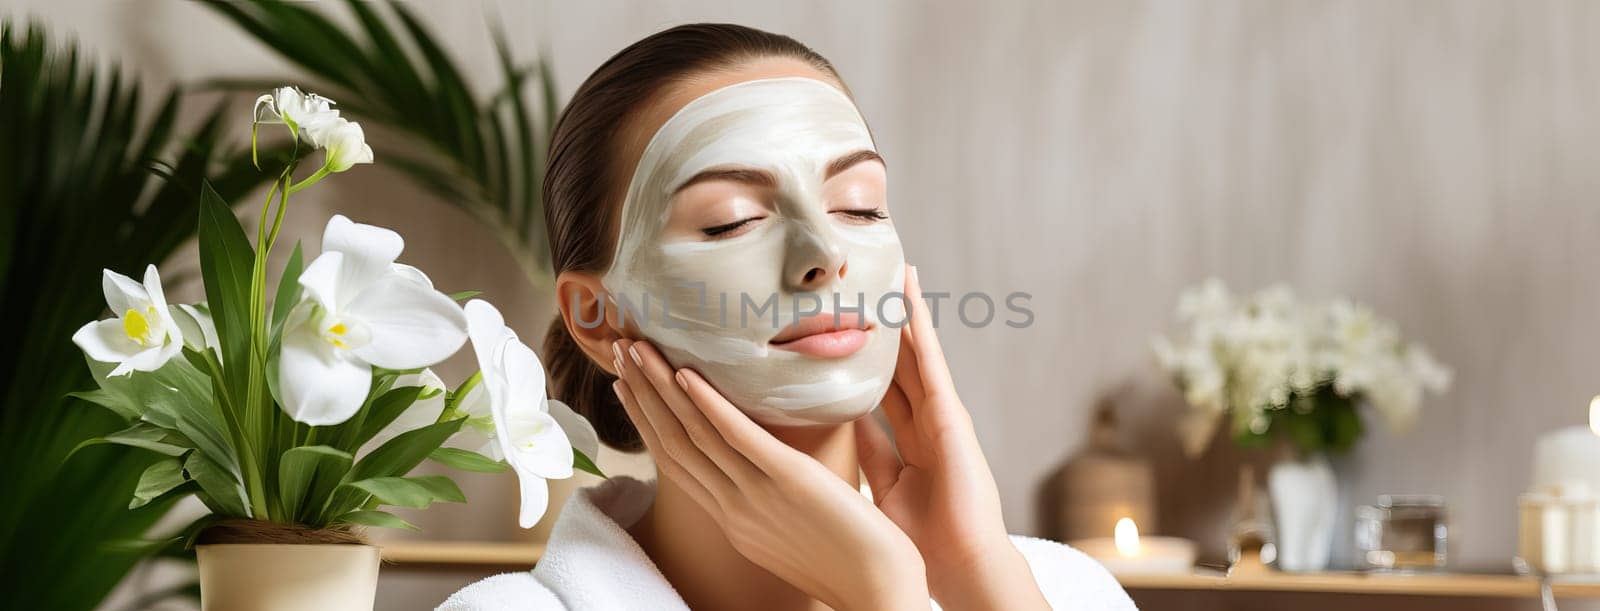 The image of a girl with a moisturizing mask on her face is the perfect banner to remind you of the importance of skincare, reviving the beauty and health of your skin.